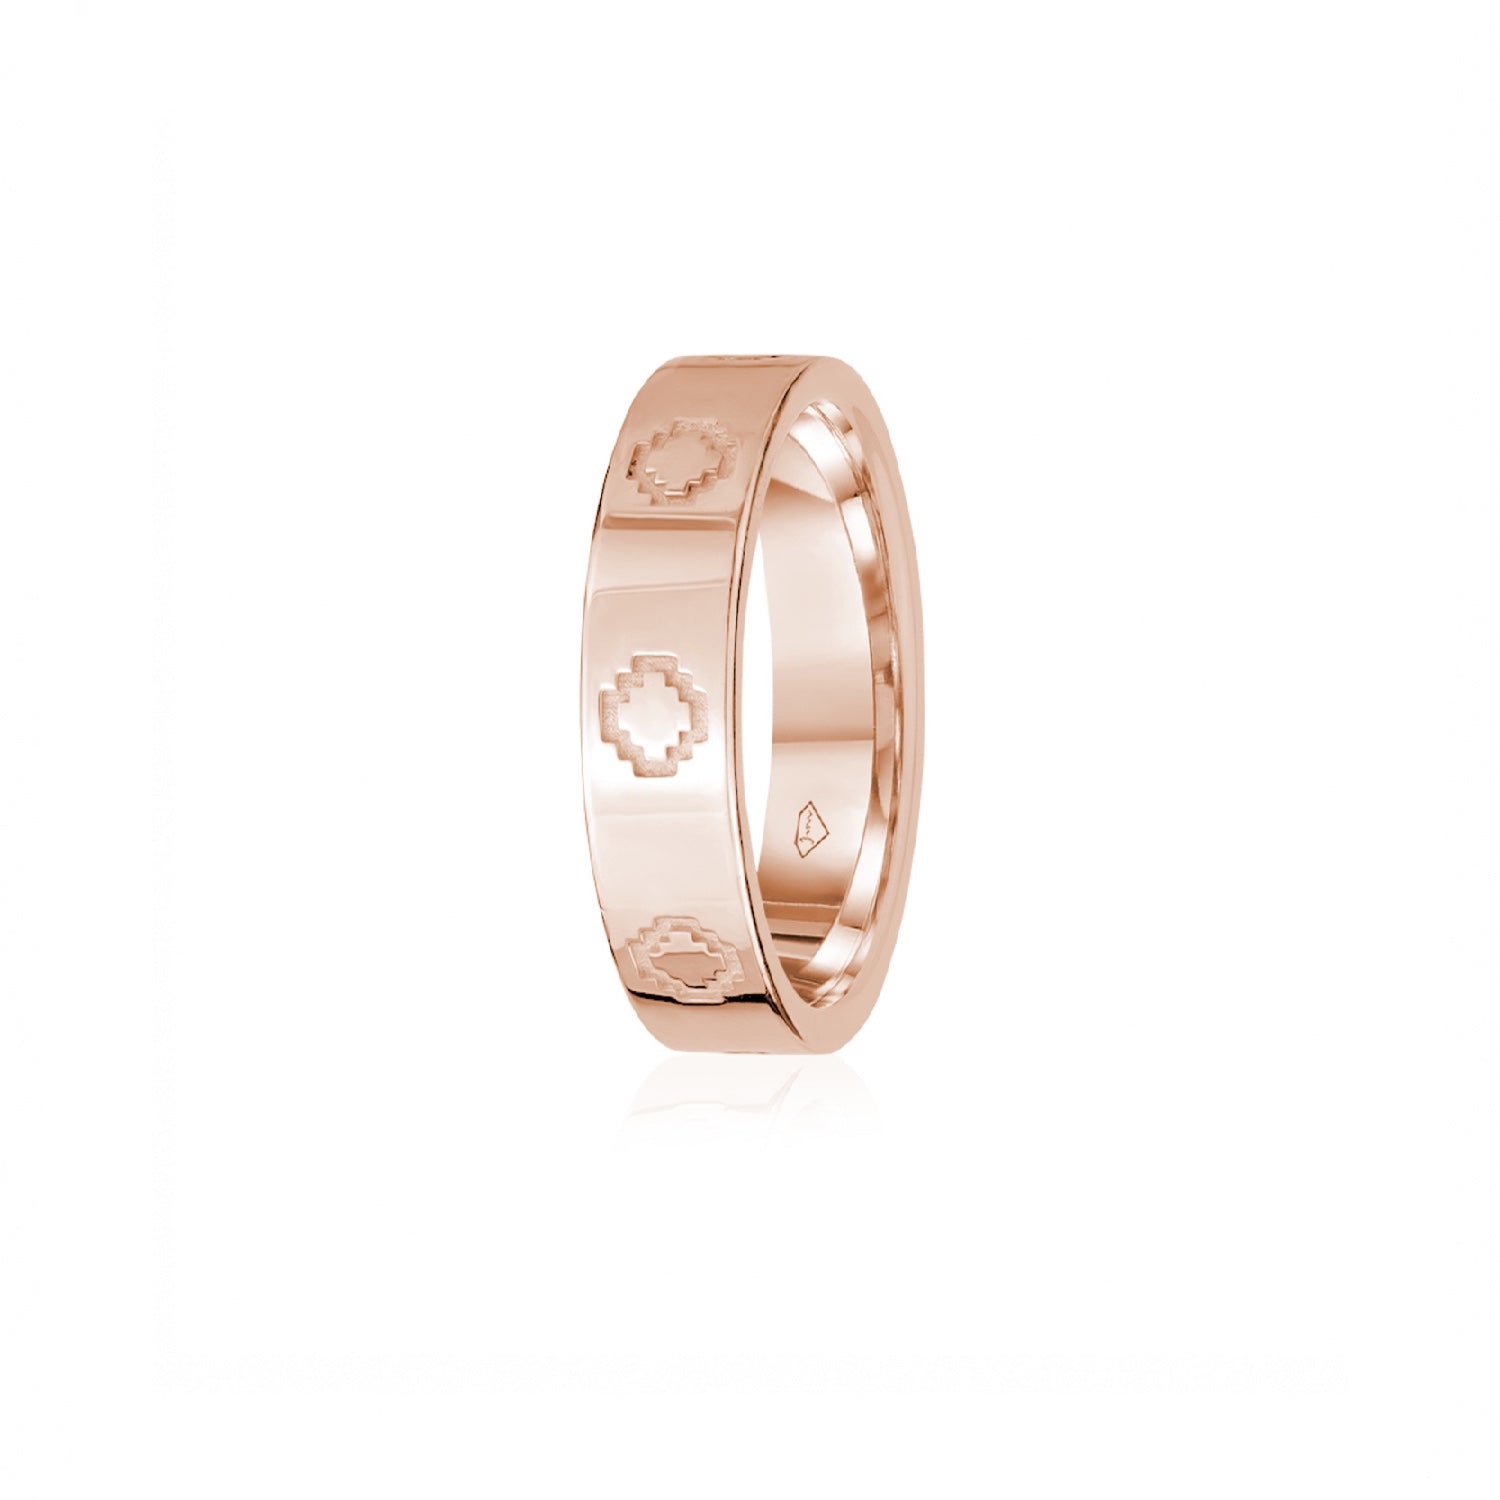 Step Motif Polished Finish Square Edge 6-7 mm Wedding Band in Rose Gold